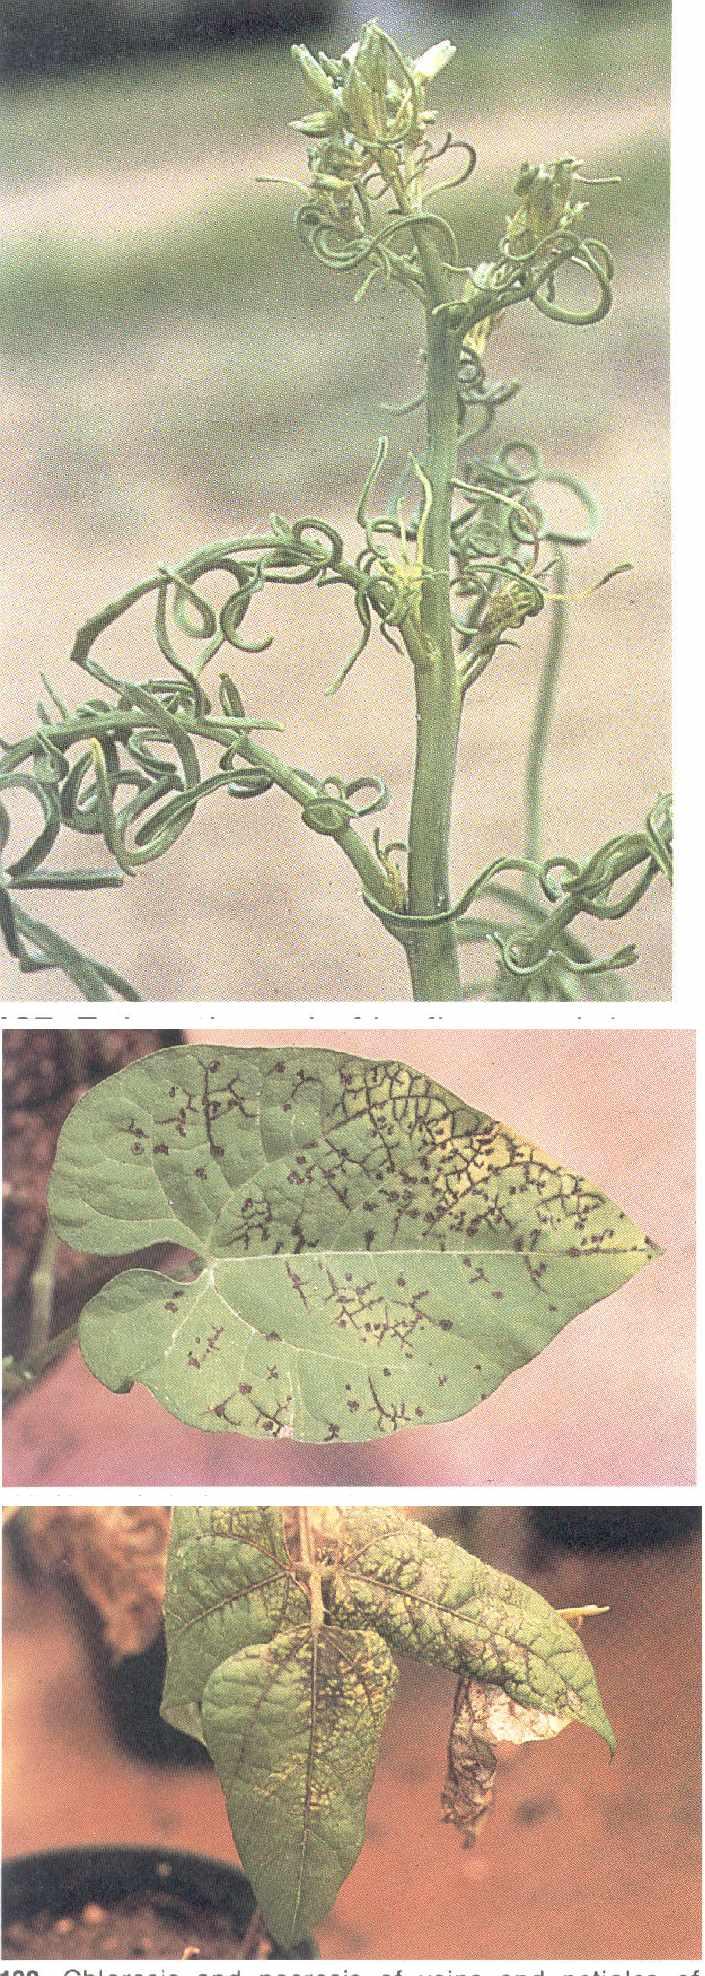 148 Epinastic curl of leaflets, petioles and inflorescence of tumble mustard (Sisymbrium altissimum), caused by beet curly top virus 149 Necrotic lesions and vein necrosis on